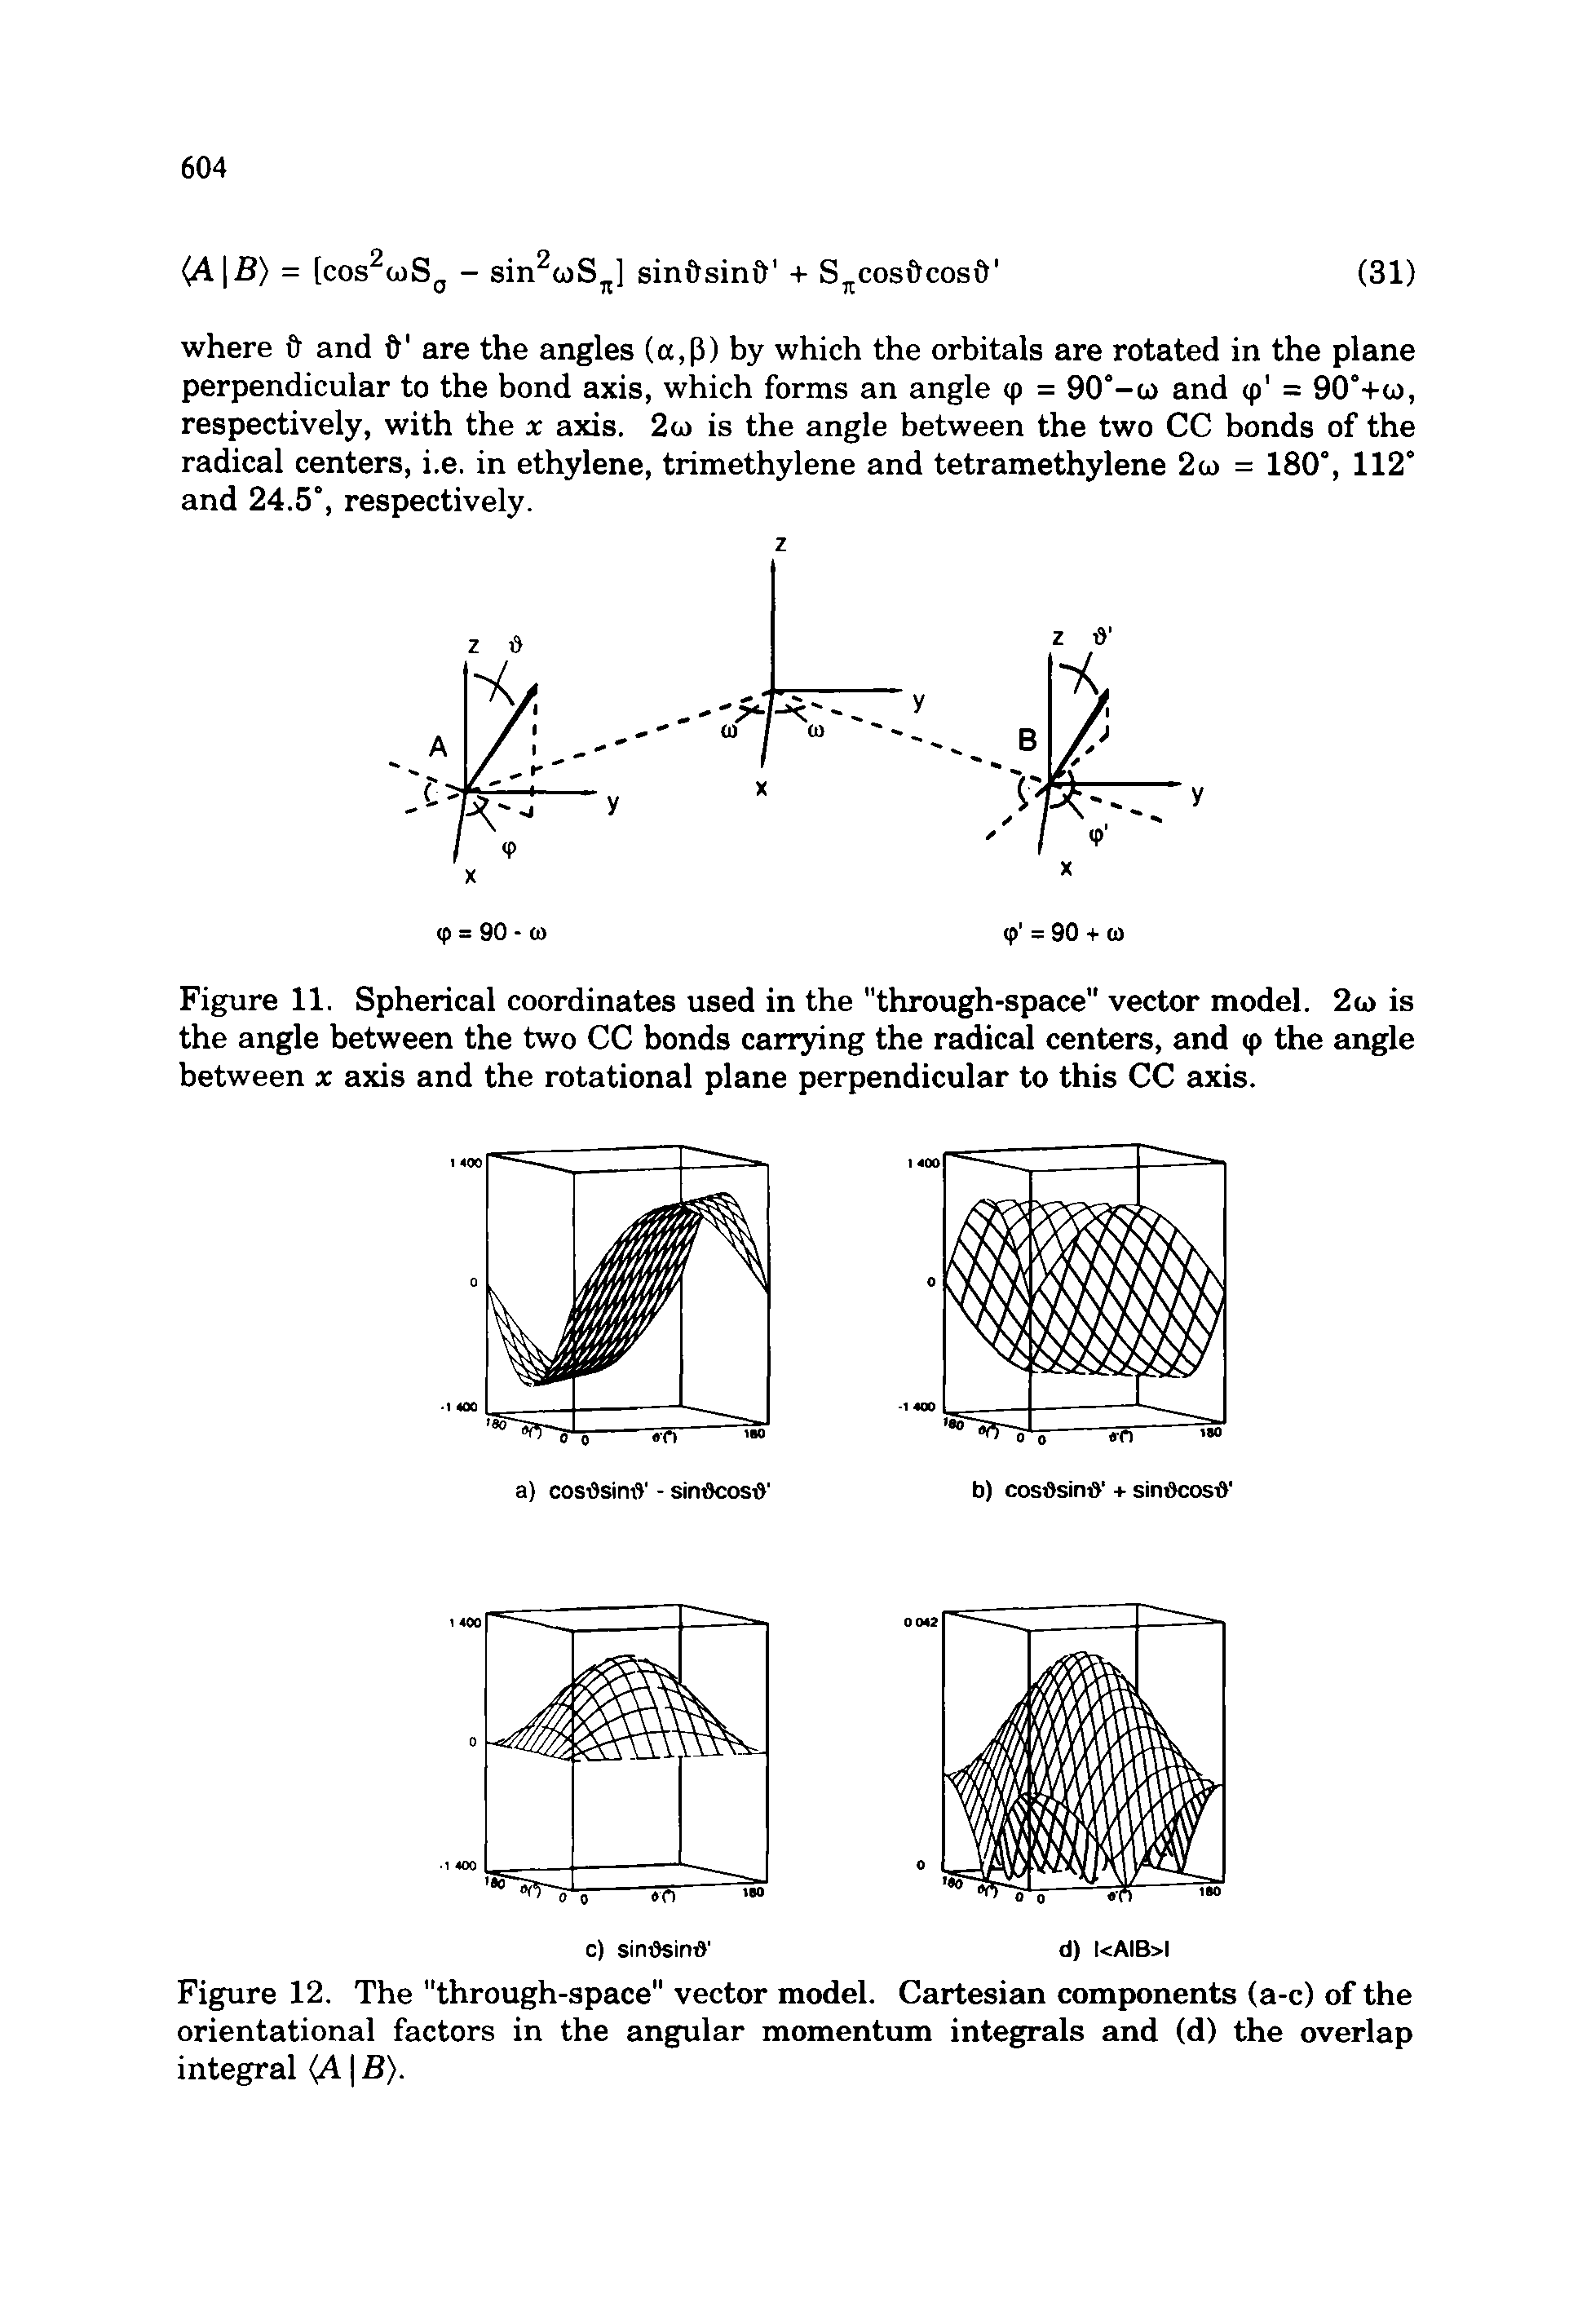 Figure 12. The "through-space" vector model. Cartesian components (a-c) of the orientational factors in the angular momentum integrals and (d) the overlap integral (A B).